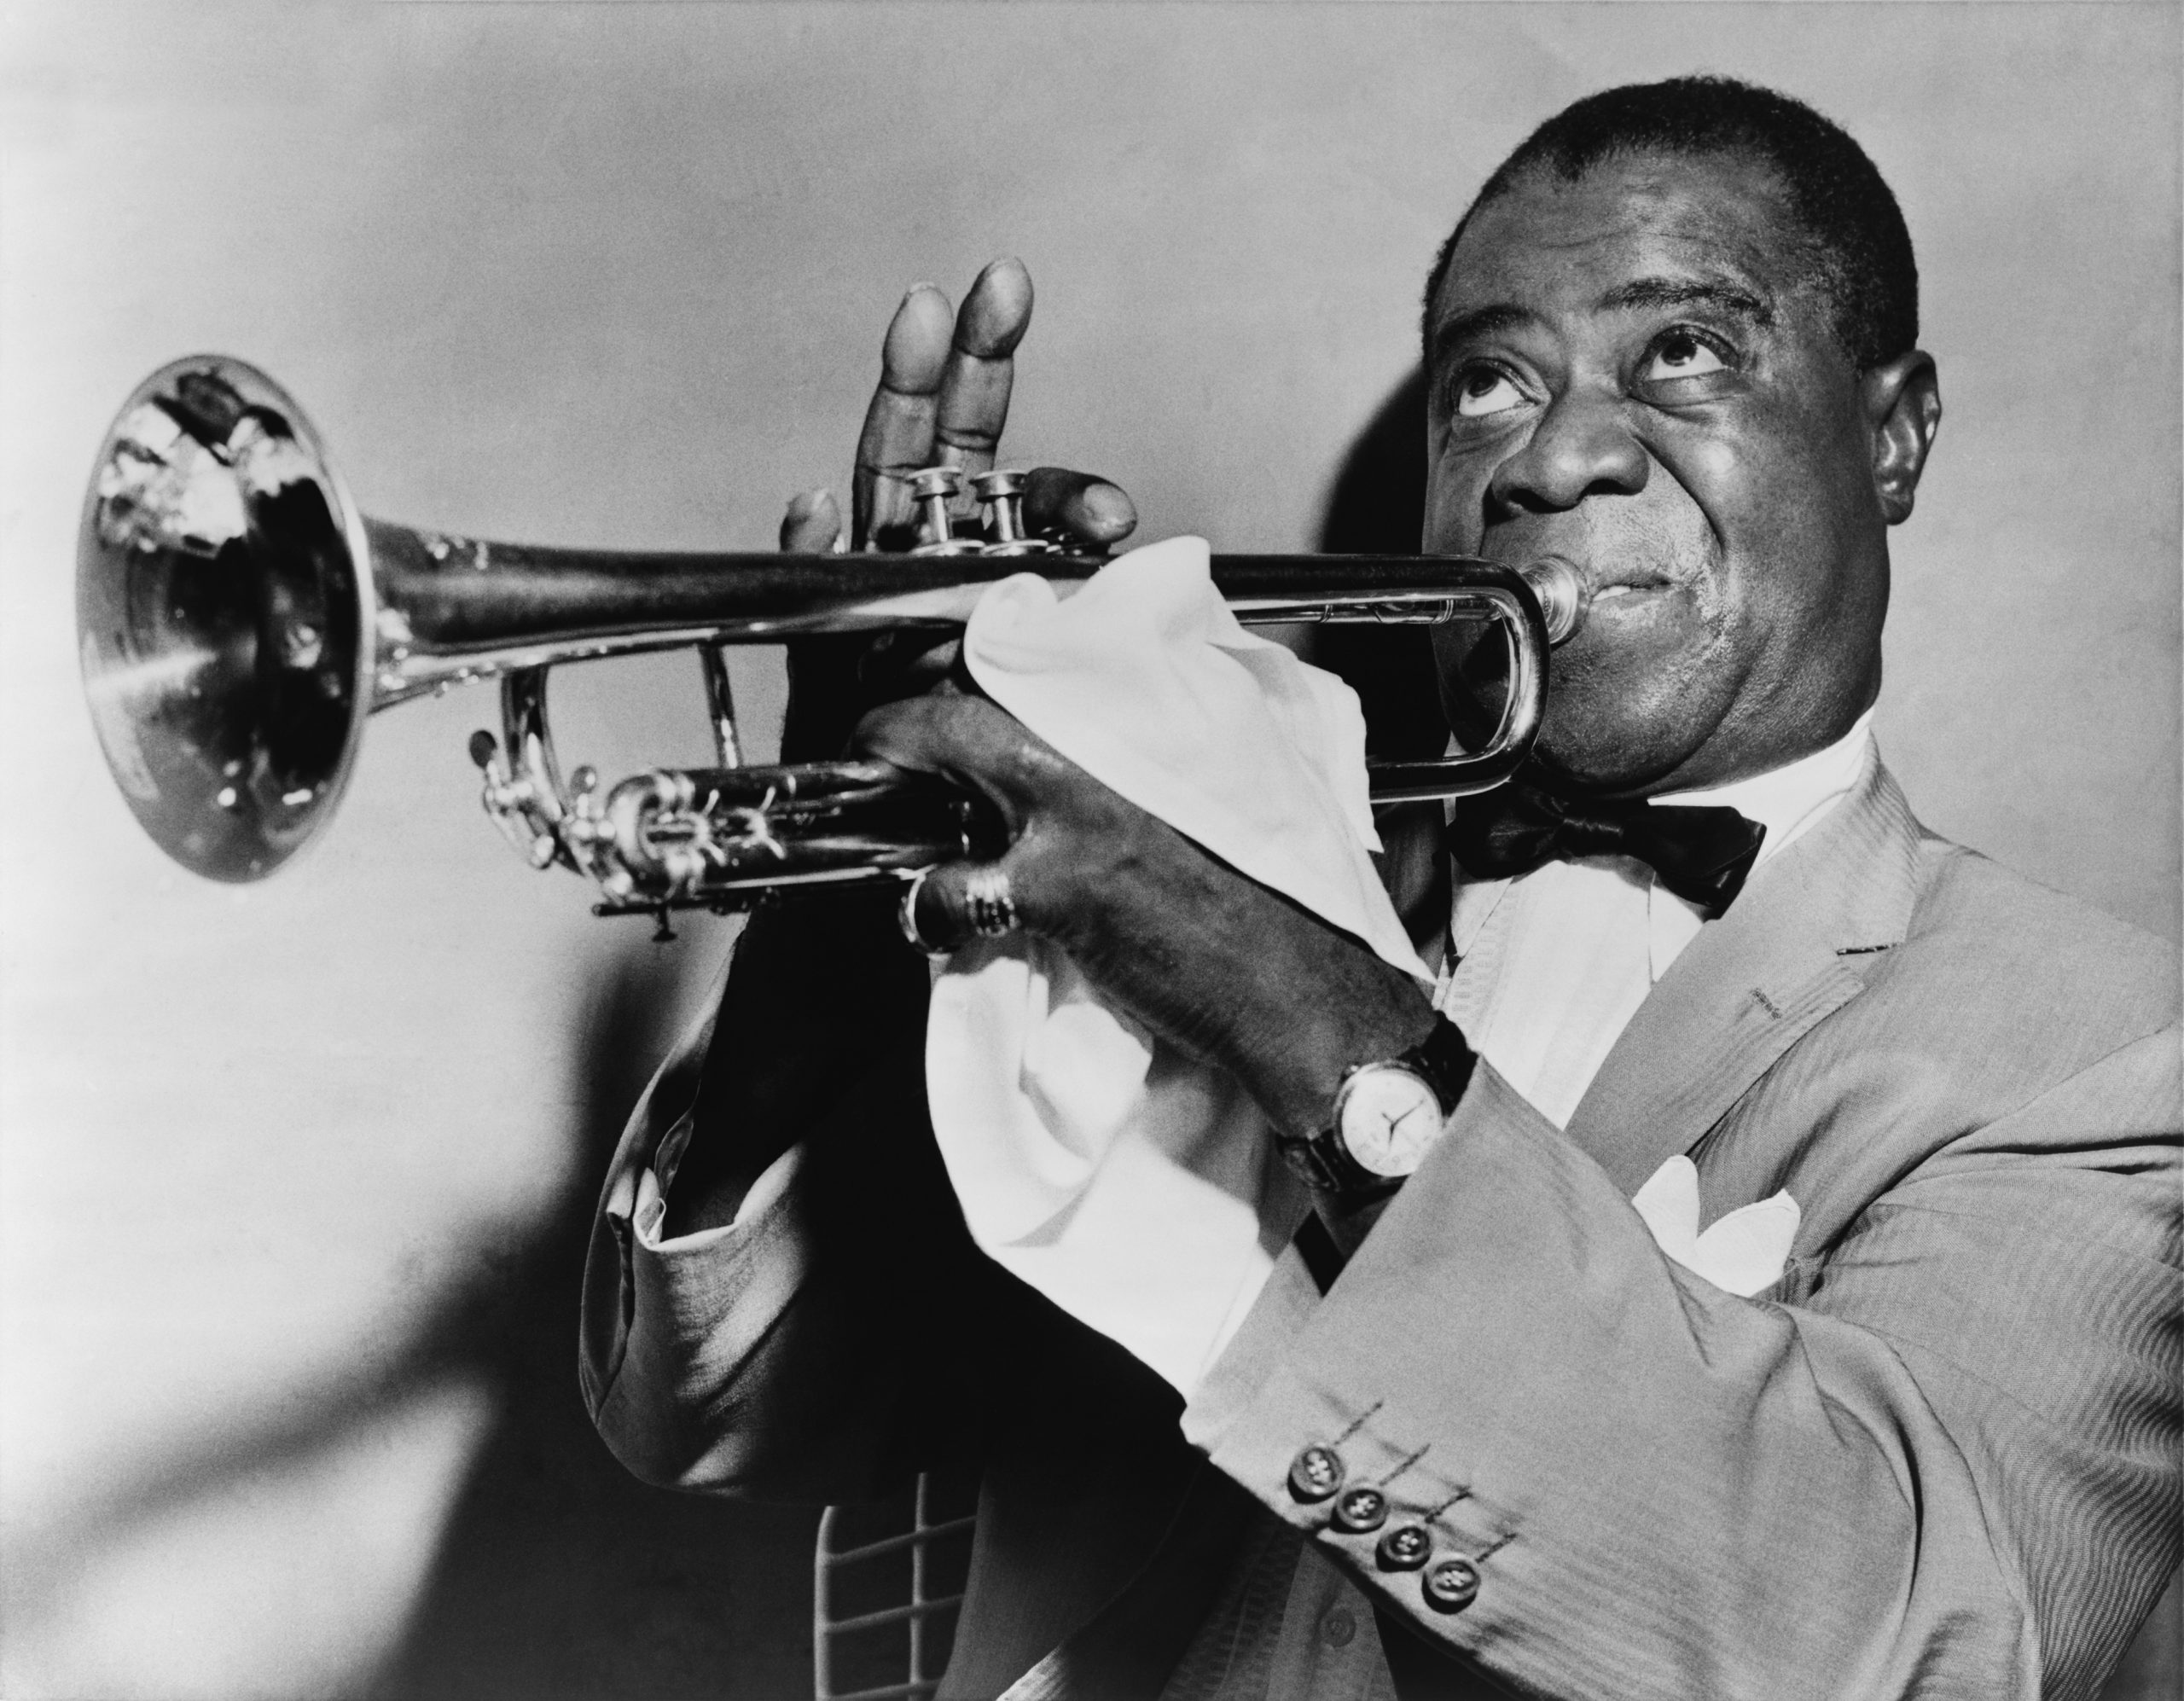 Foto: Louis Daniel Armstrong (August 4, 1901 – July 6, 1971), nicknamed "Satchmo", "Satch", and "Pops" | © Library of Congress's Prints and Photographs division under the digital ID cph.3c27236